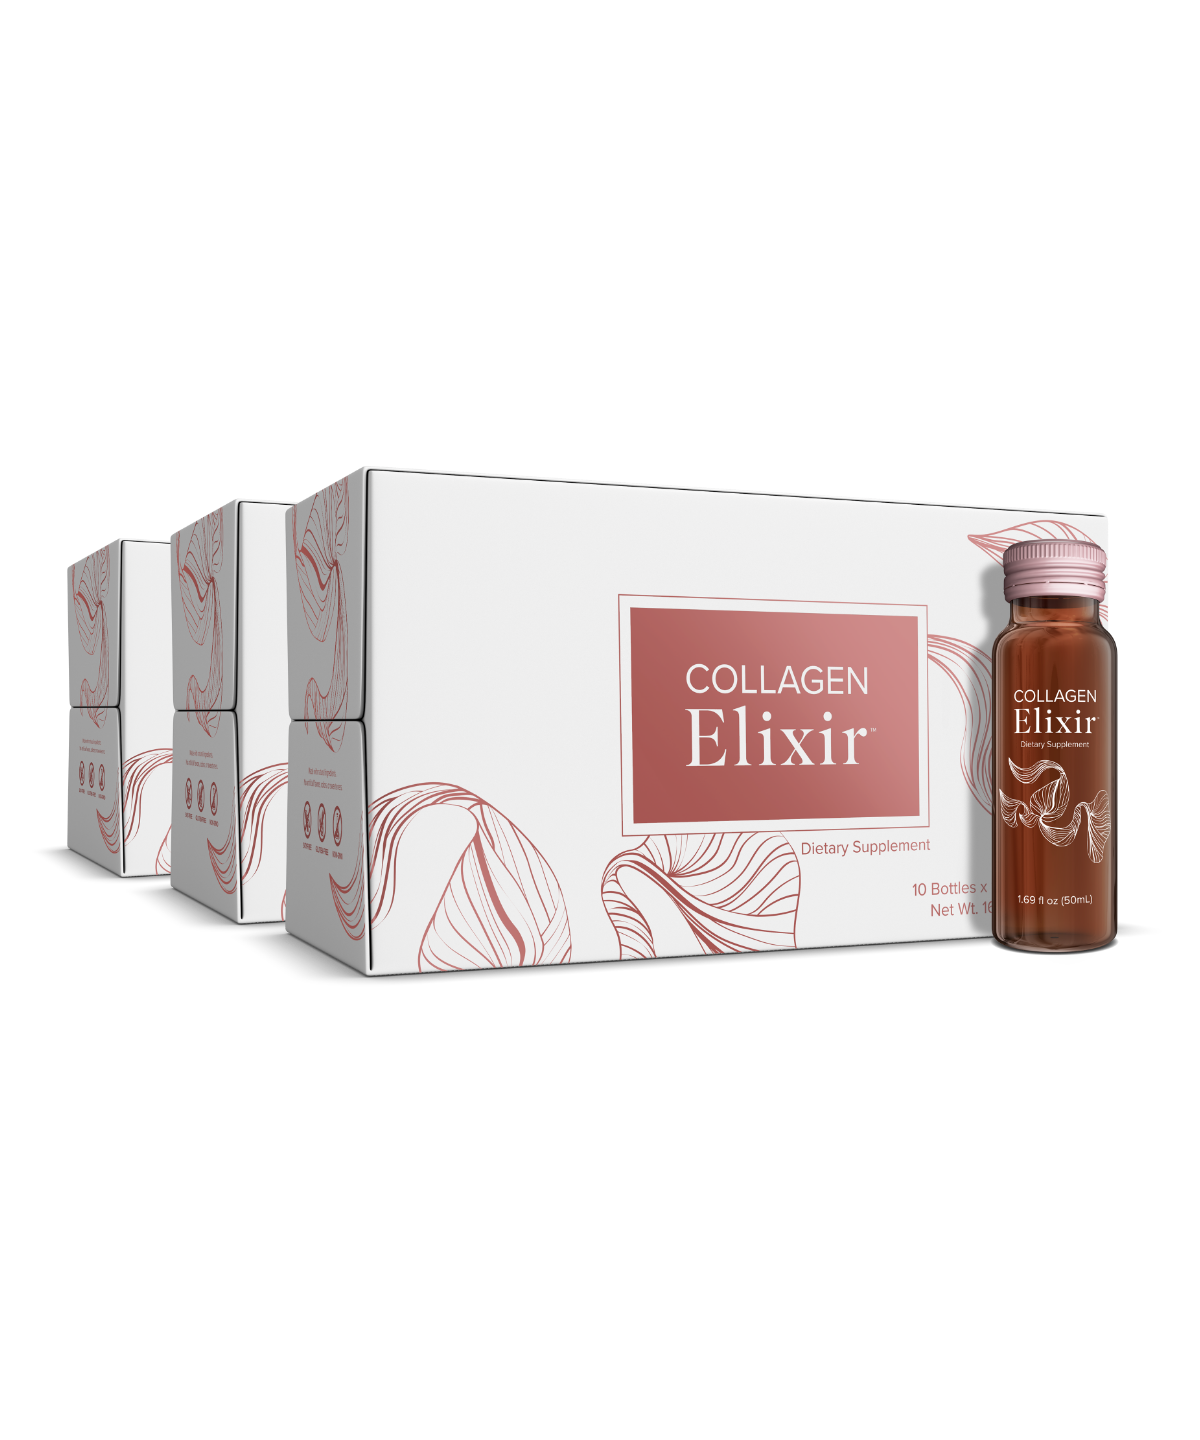 Collagen Elixir 3 packs with 30 bottles of 50ml each for 1 month